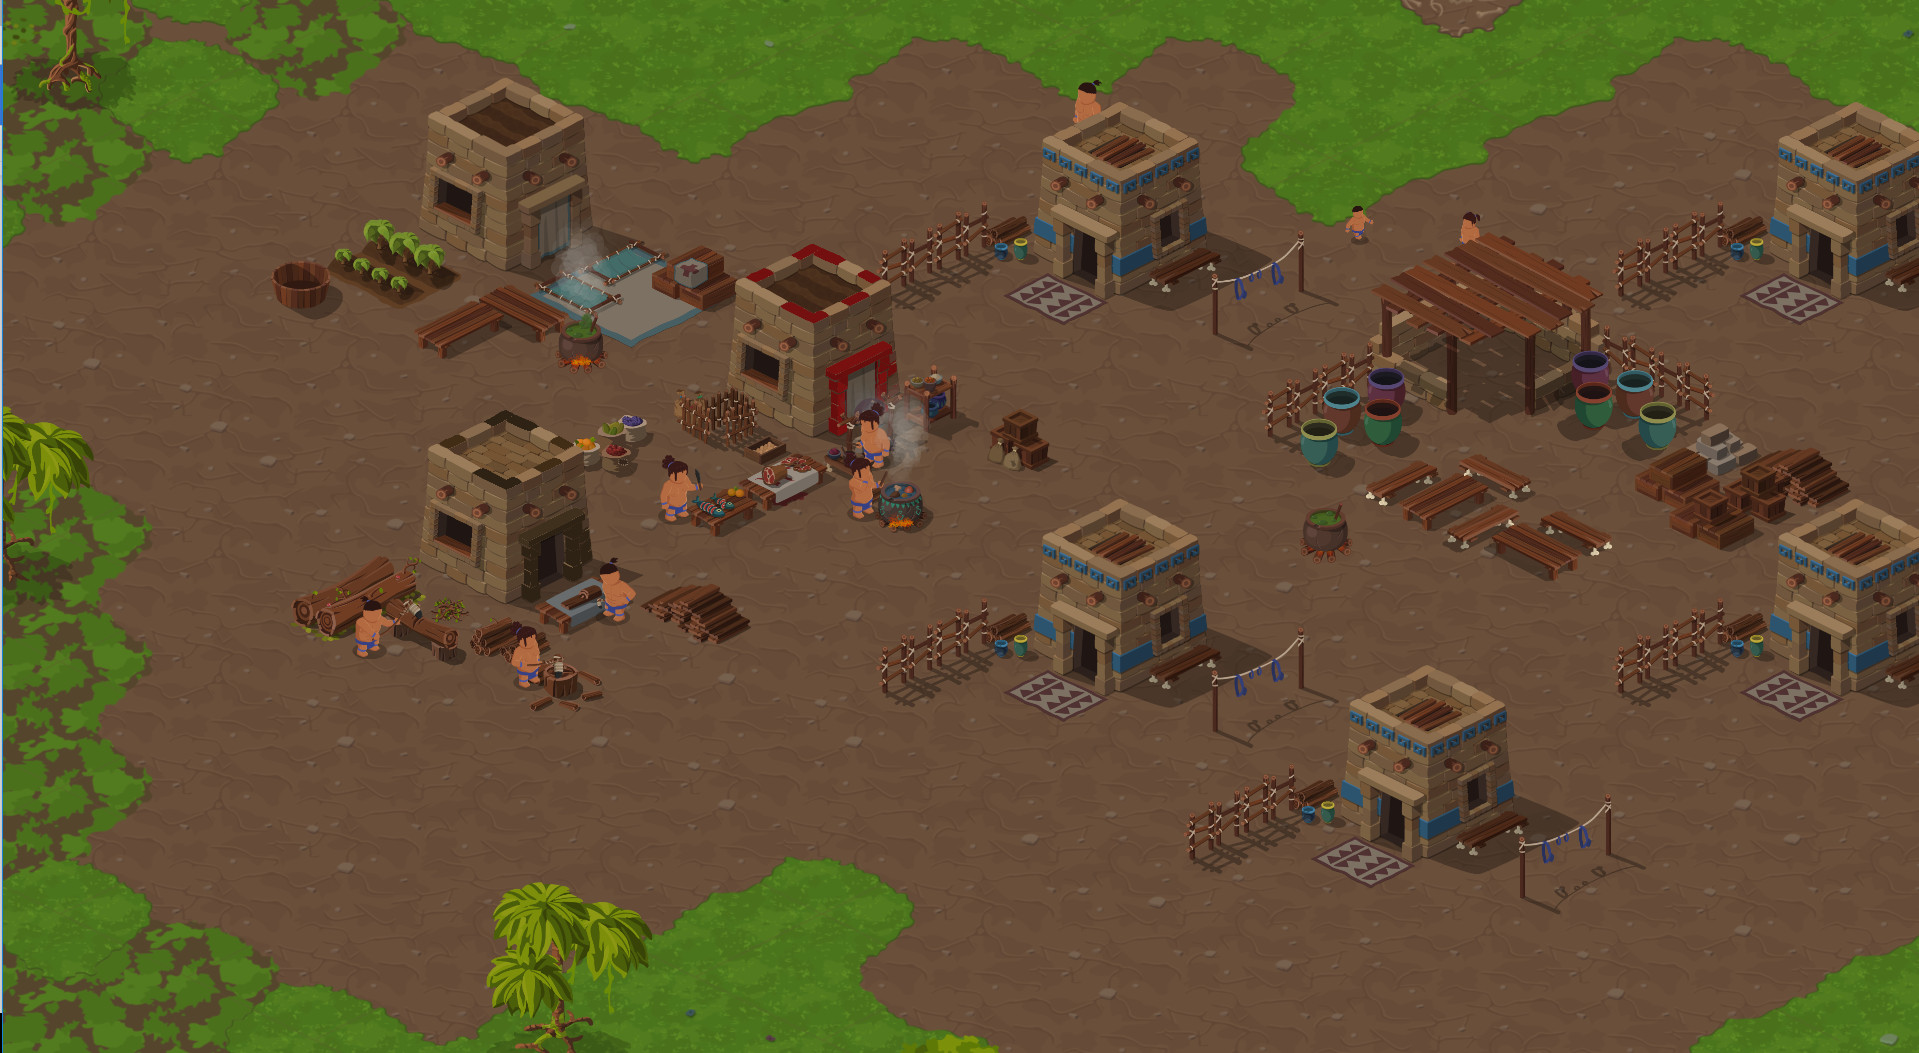 This stock village can be yours for only a few clicks!